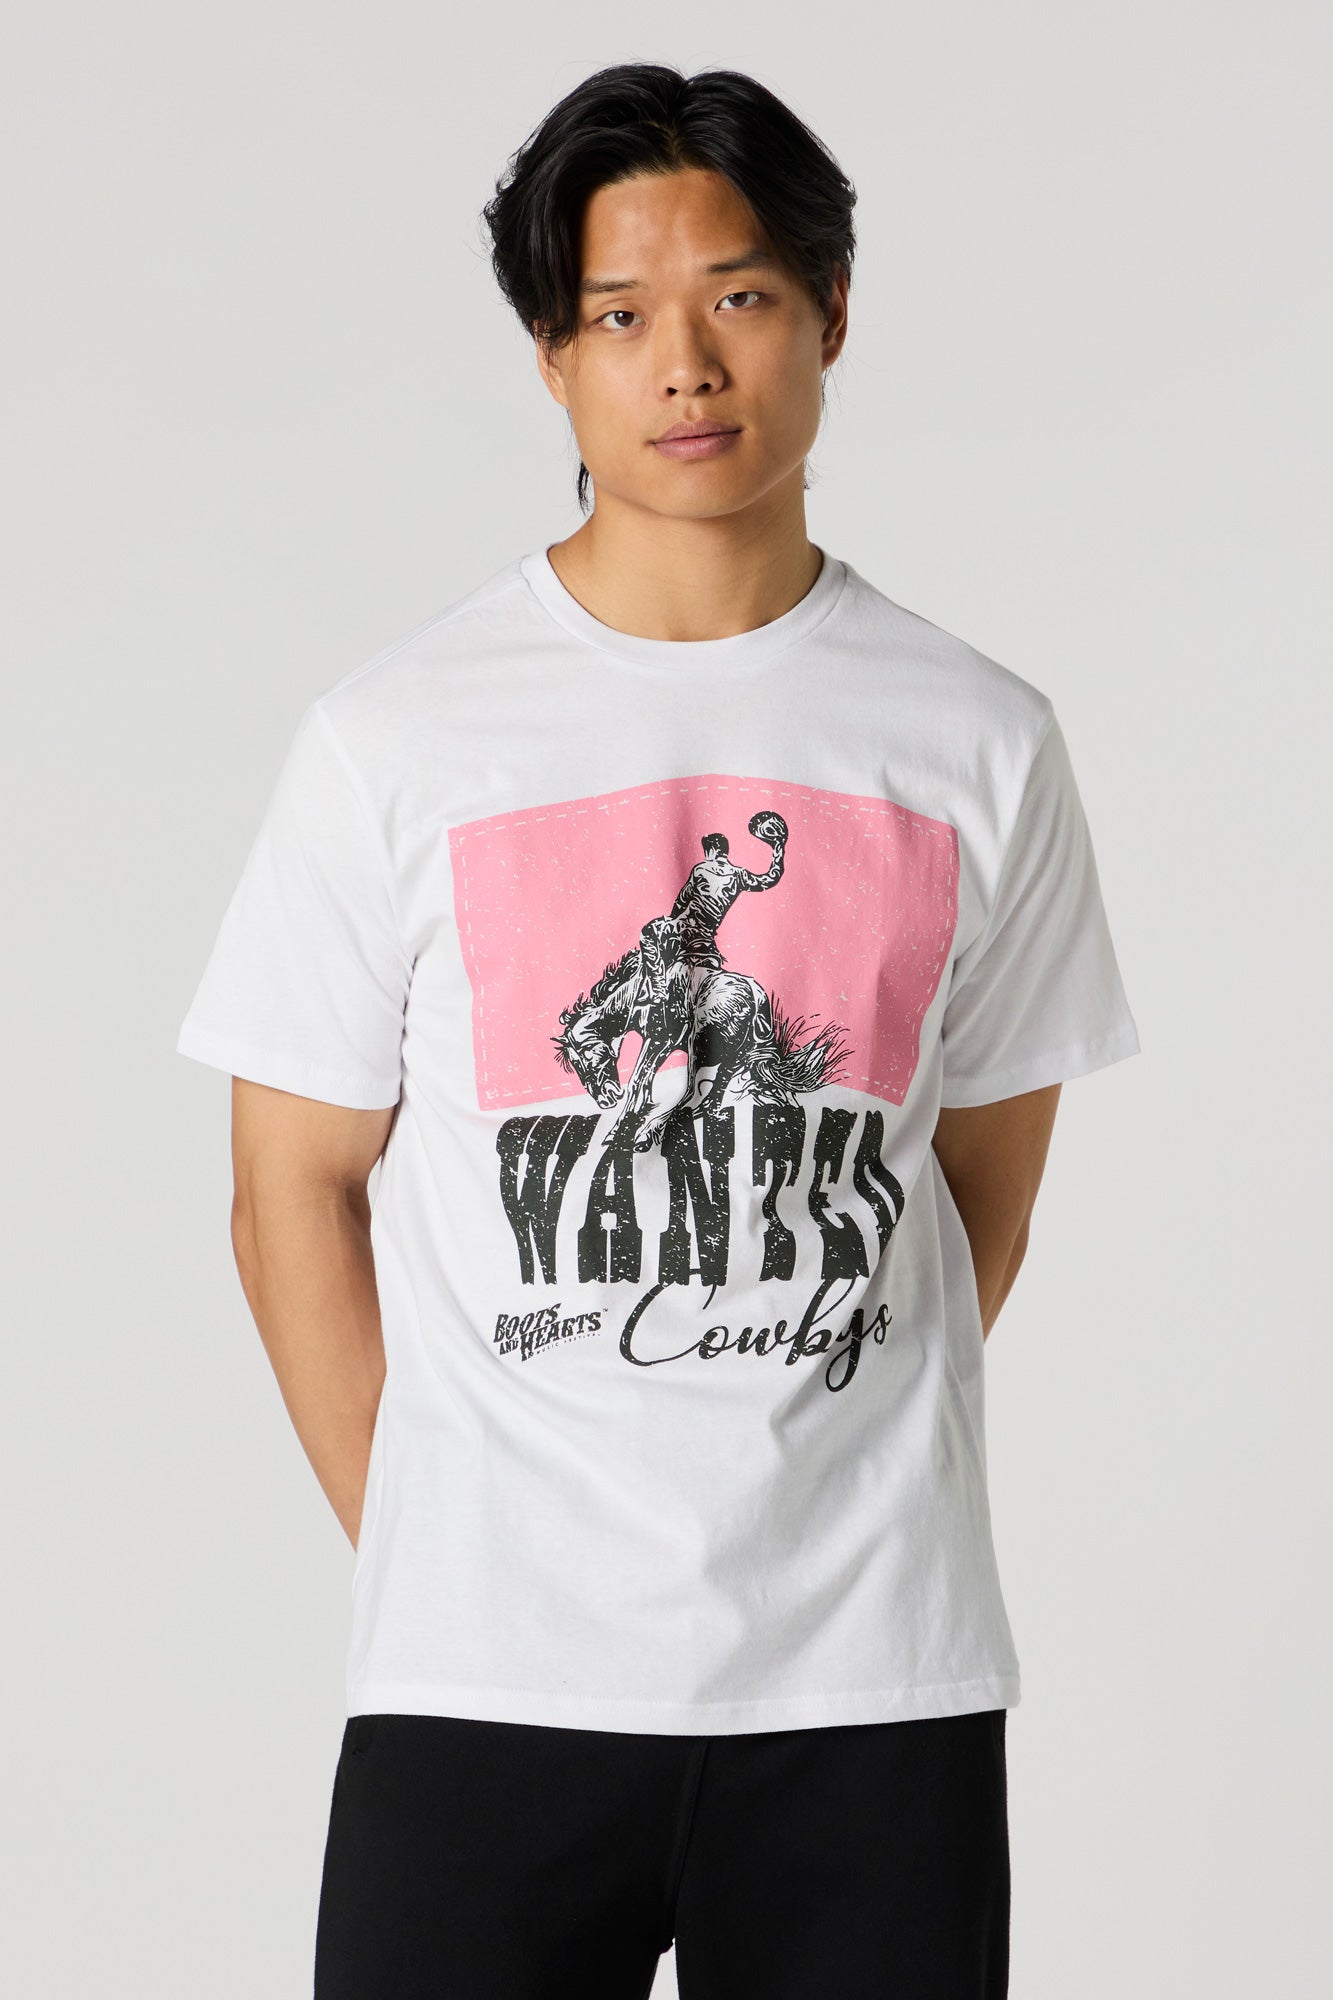 Boots and Hearts Wanted Cowboys Graphic T-Shirt